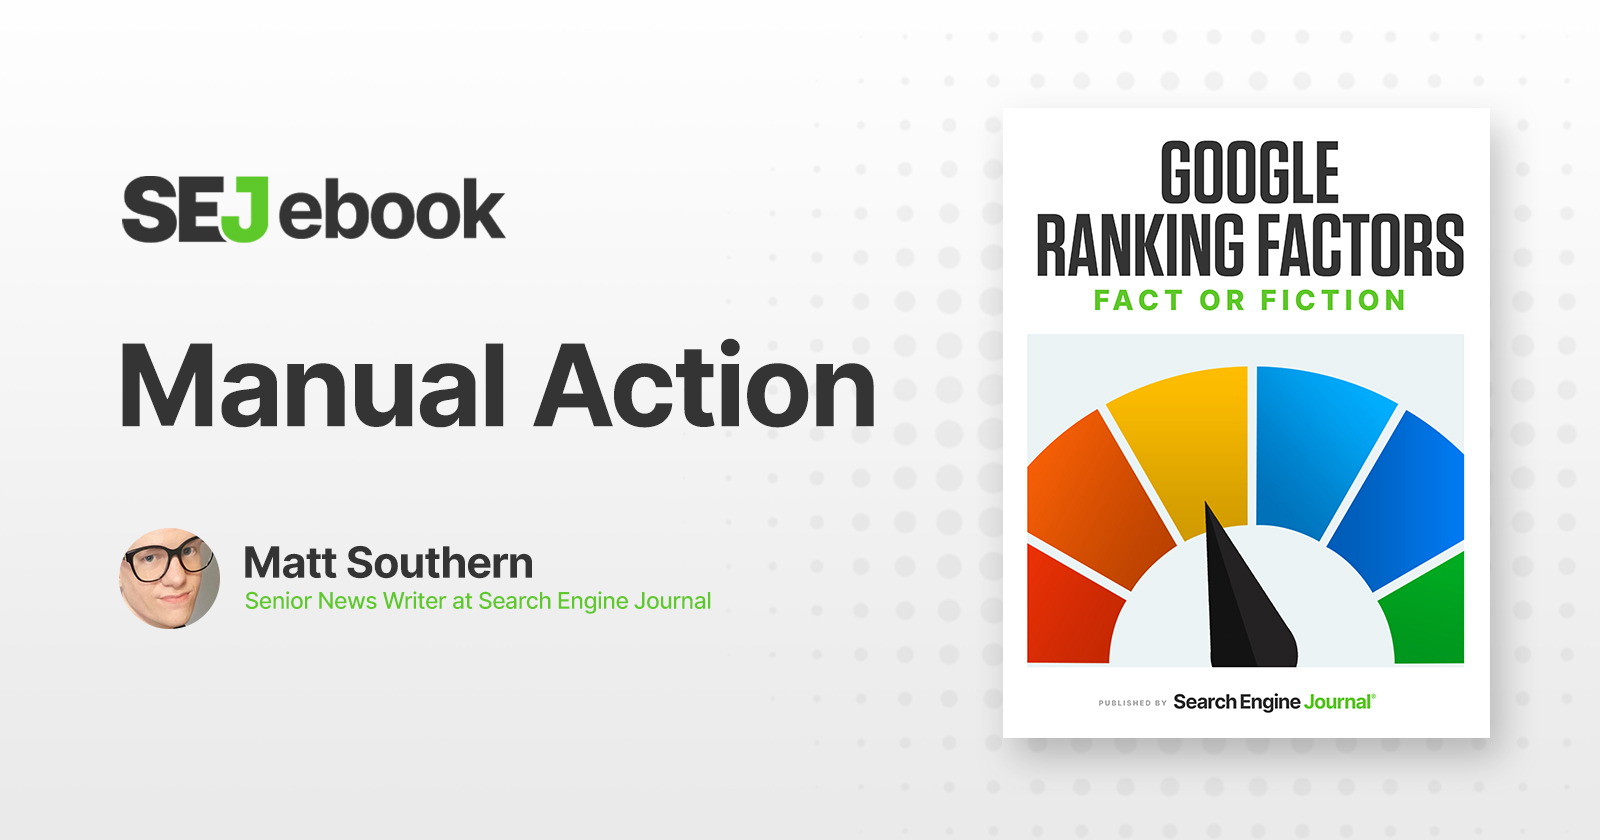 Are Manual Actions a Google Ranking Factor?